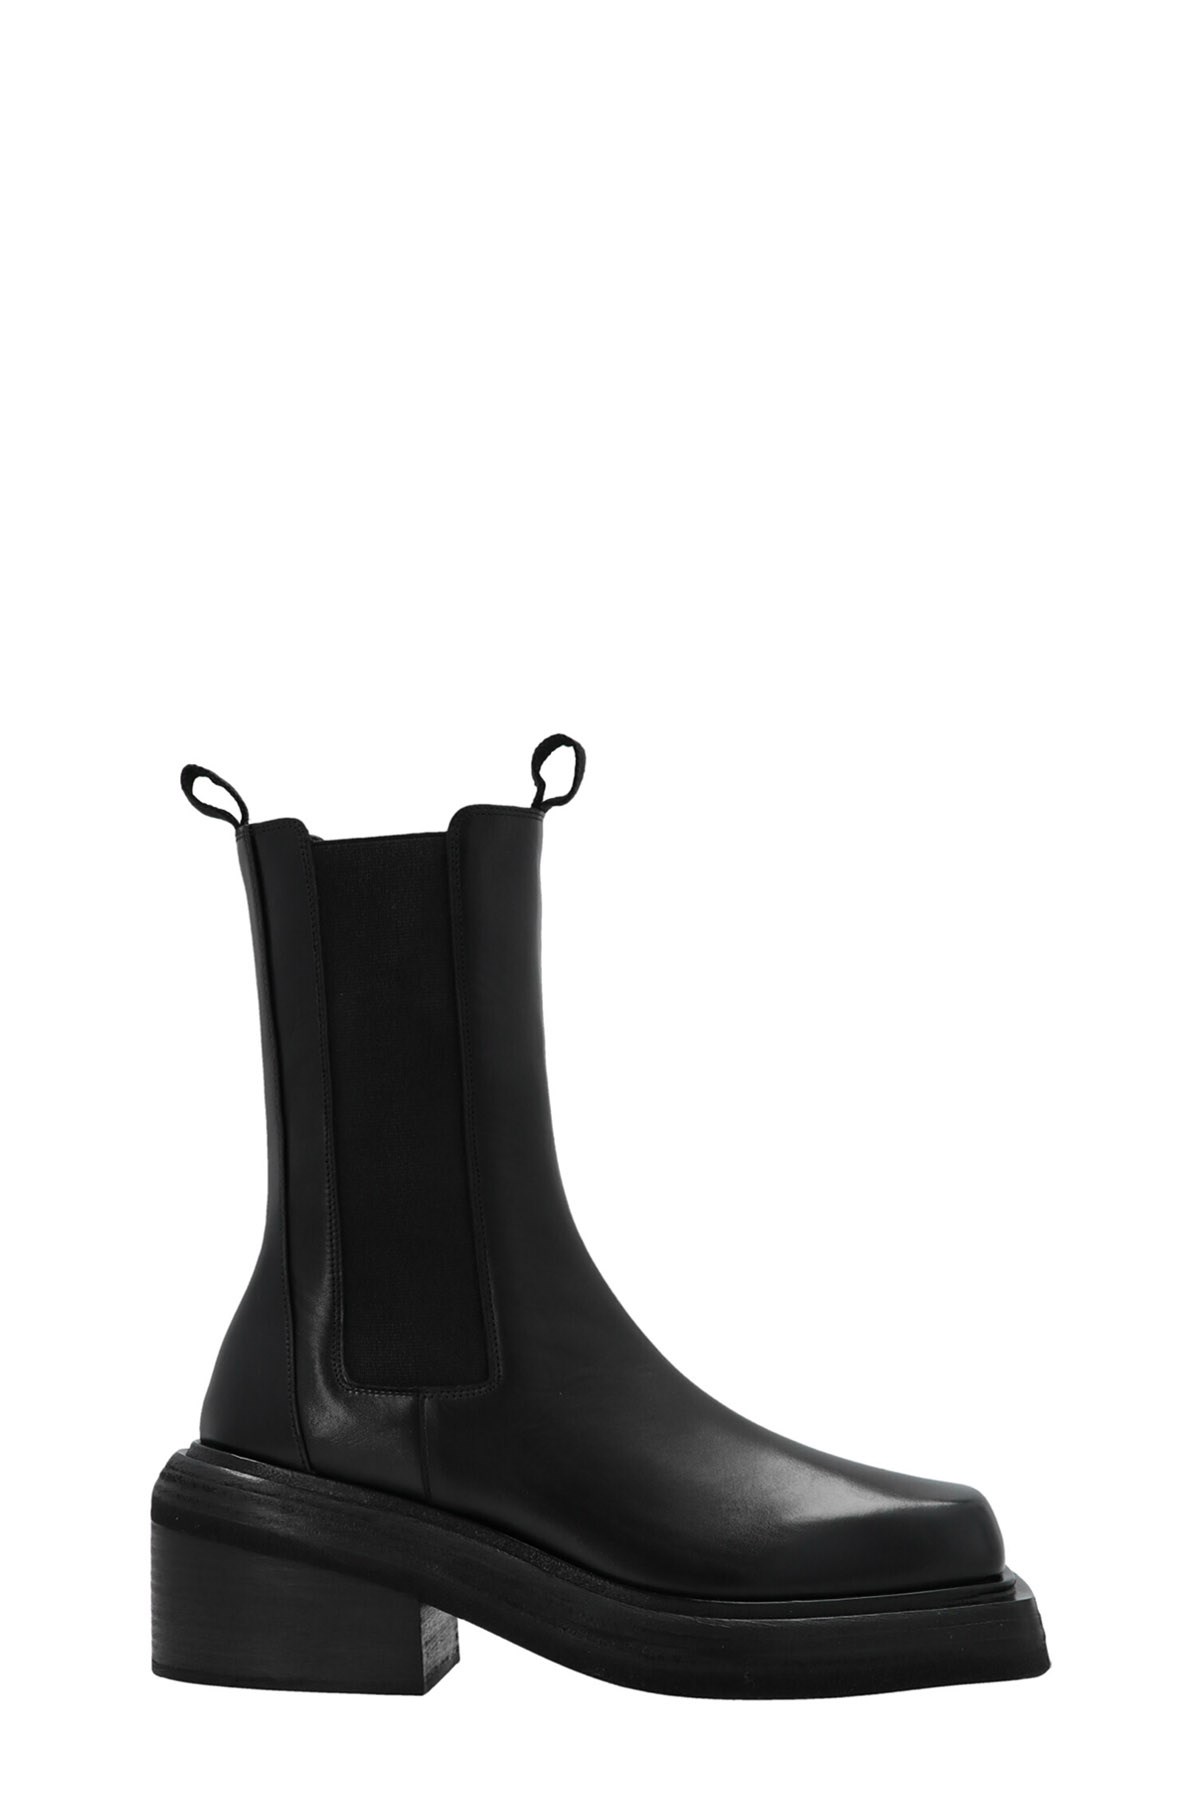 MARSÈLL 'Cassetto’ Ankle Boots